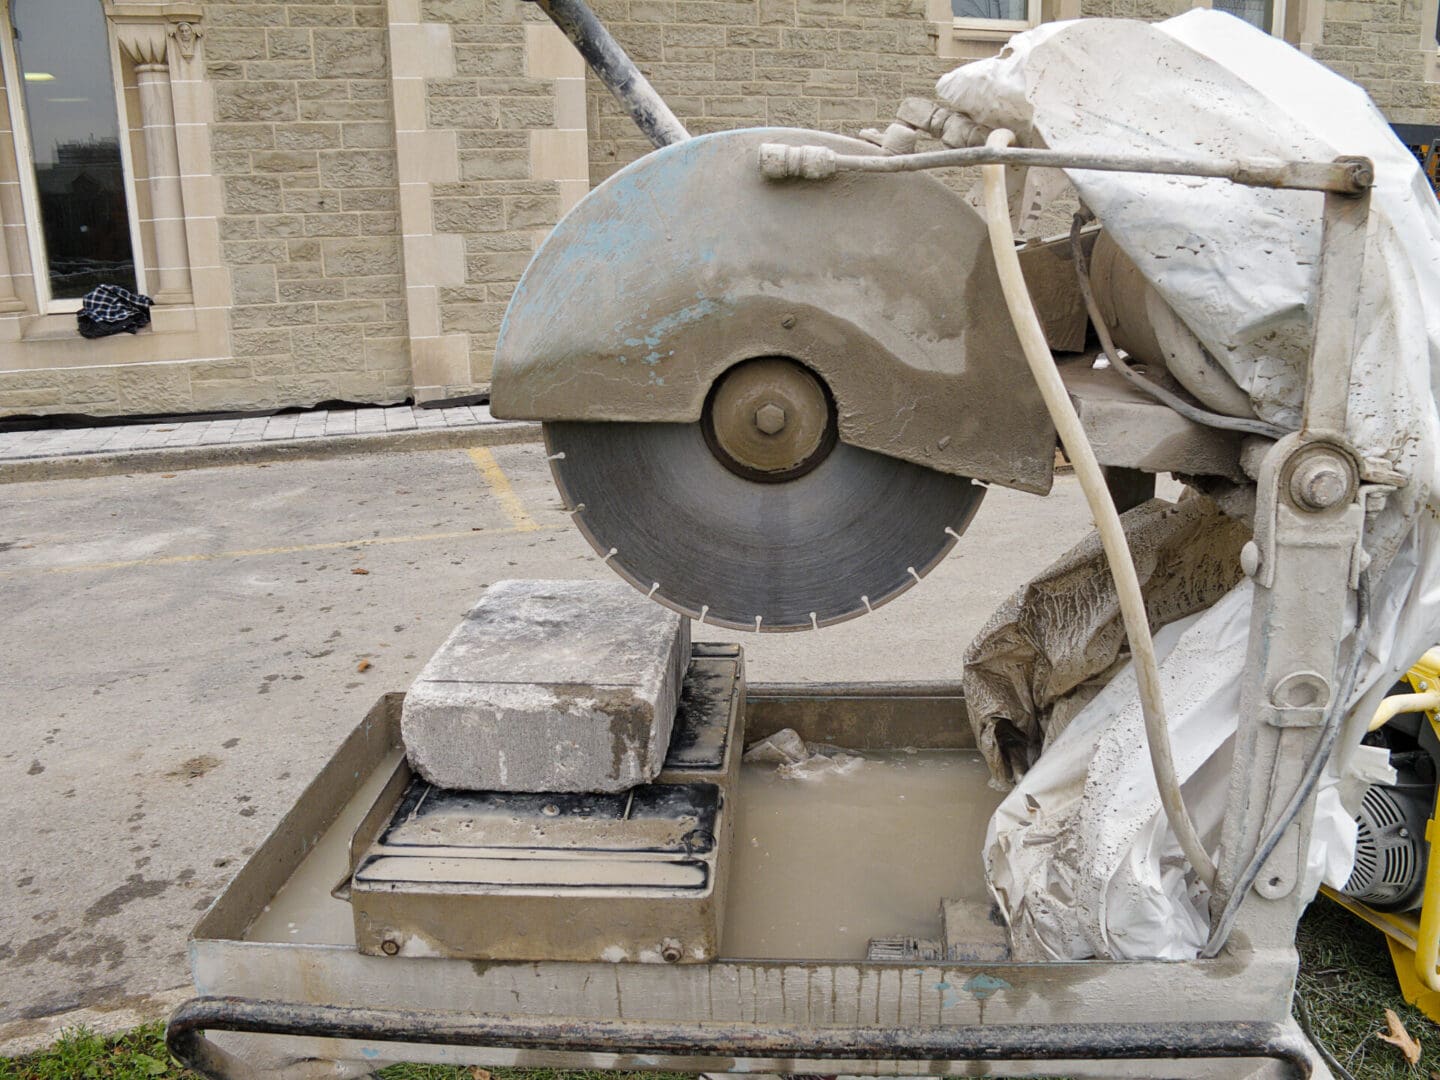 A circular saw cutting through concrete on the side of a road.